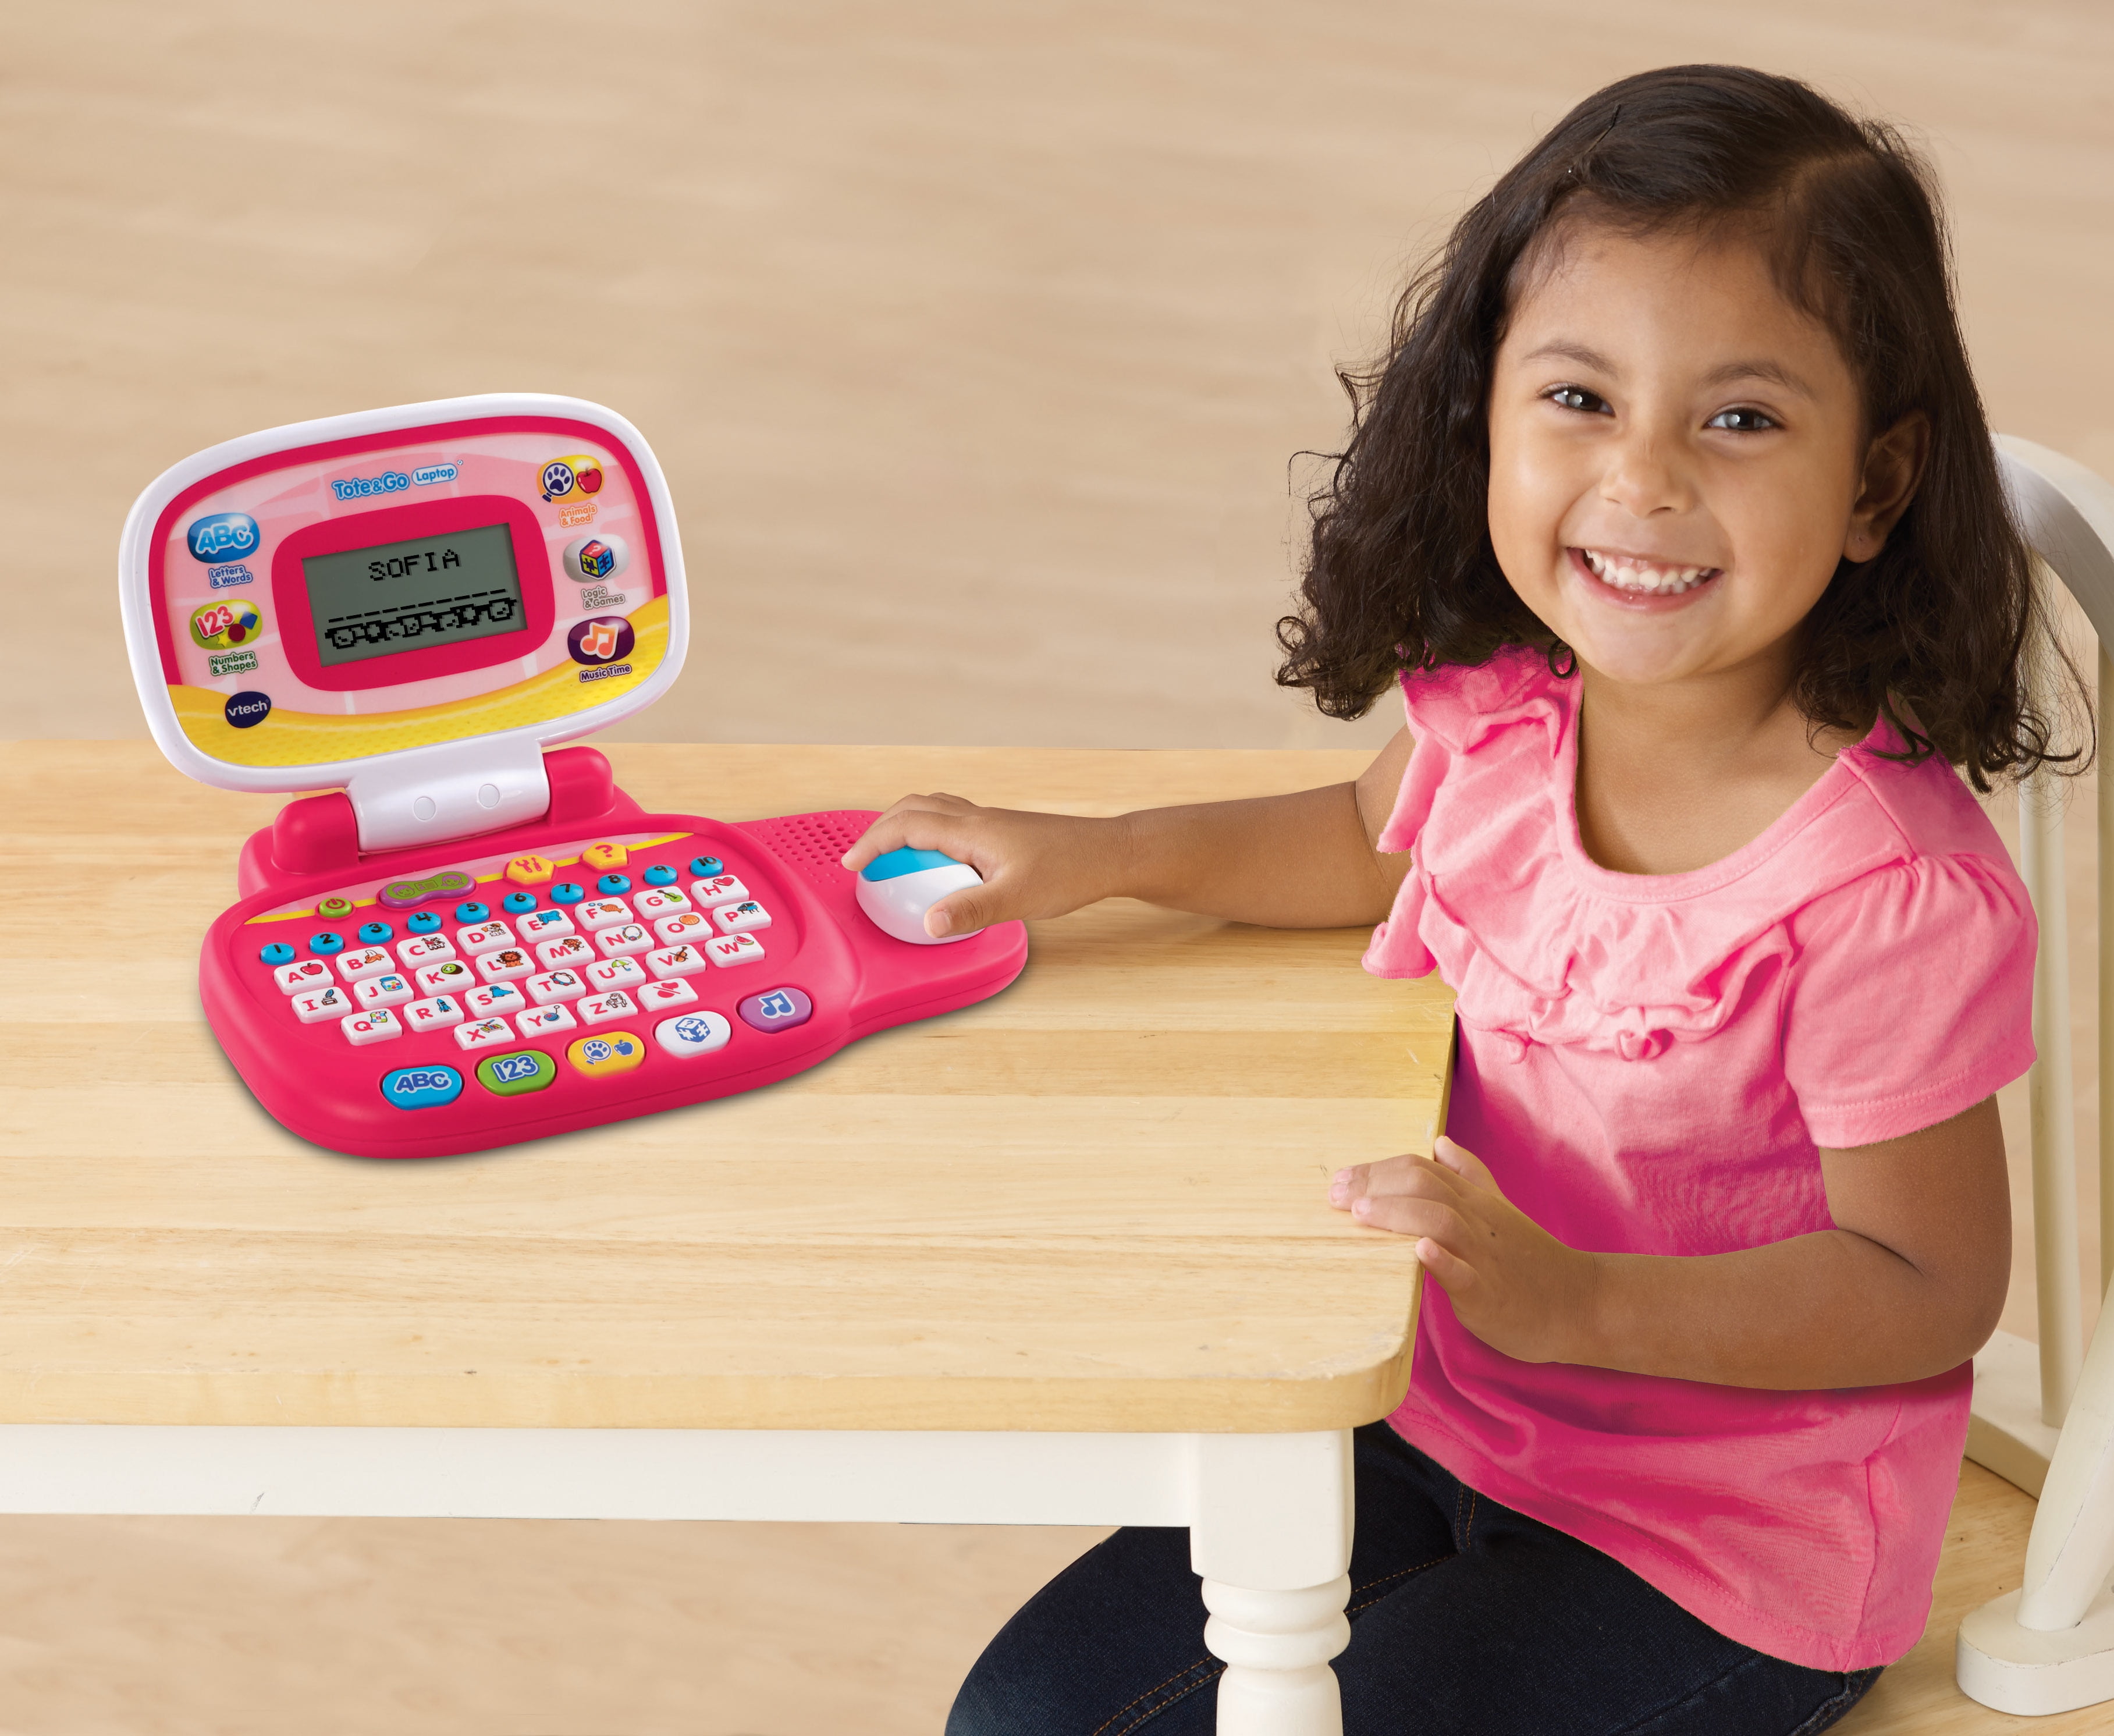 NEW VTech Tote and Go Laptop Pink Toy Kid Computer Games Kids